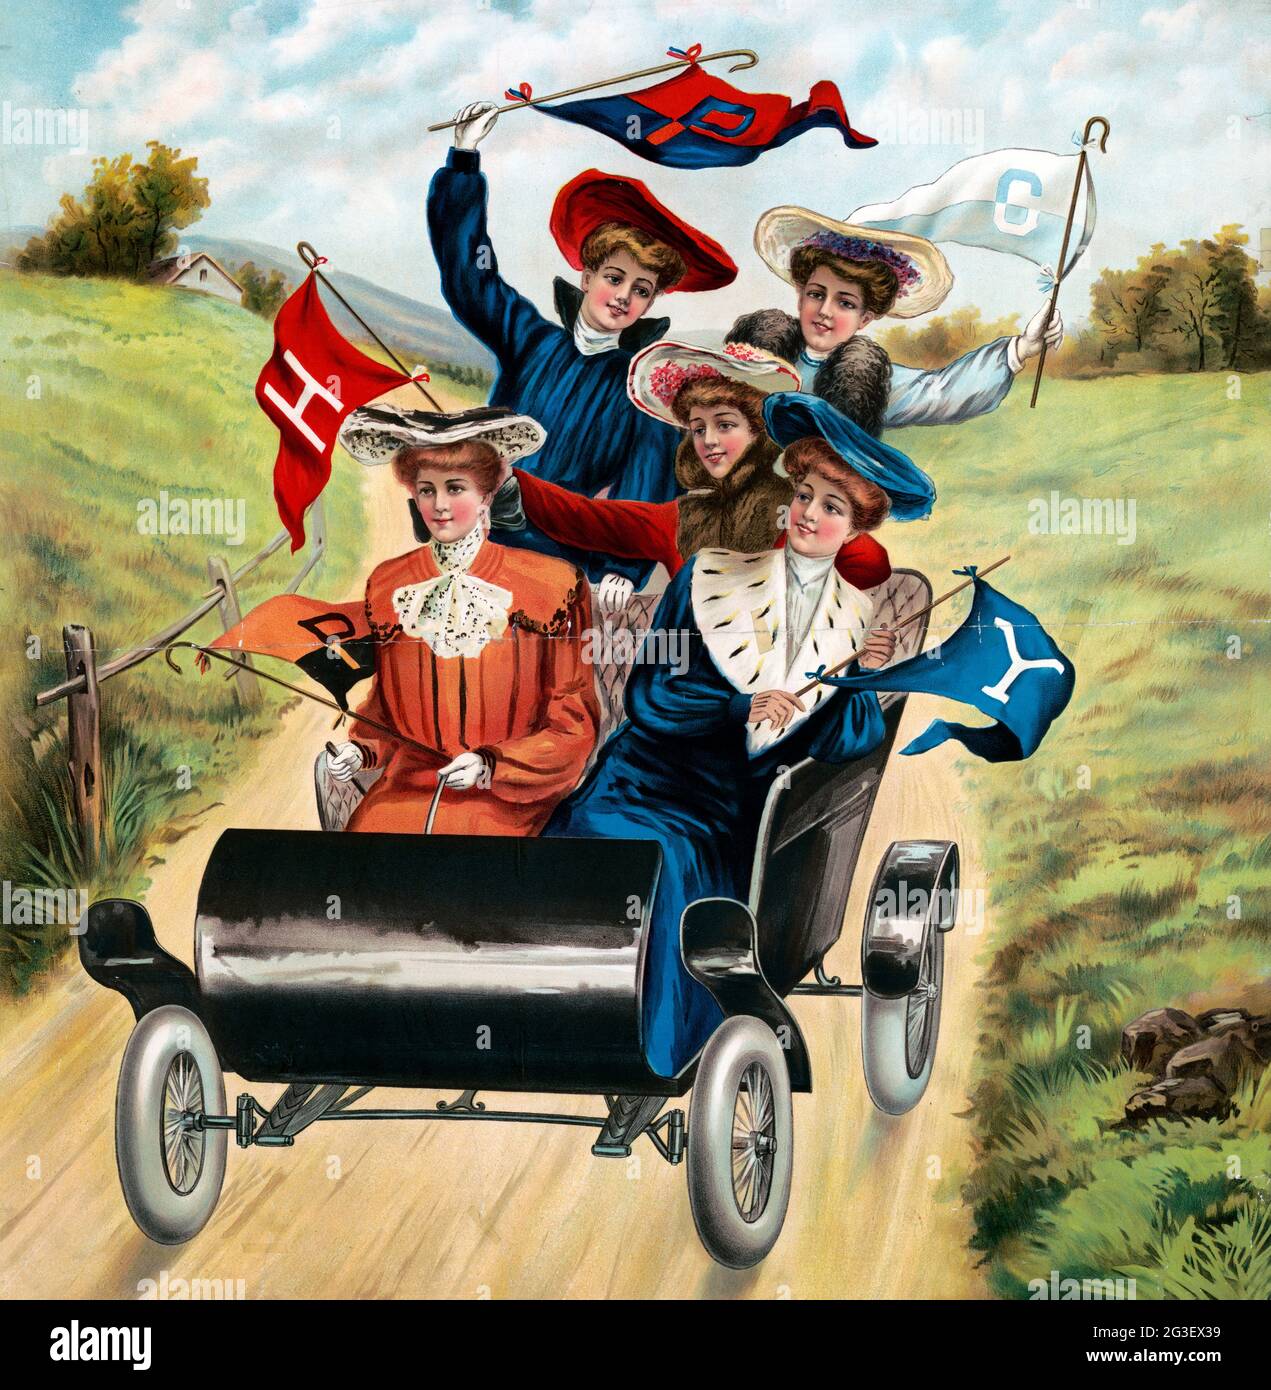 Five women driving in an early automobile, each one is dressed fashionably wearing coats and hats, holding flags. Stock Photo